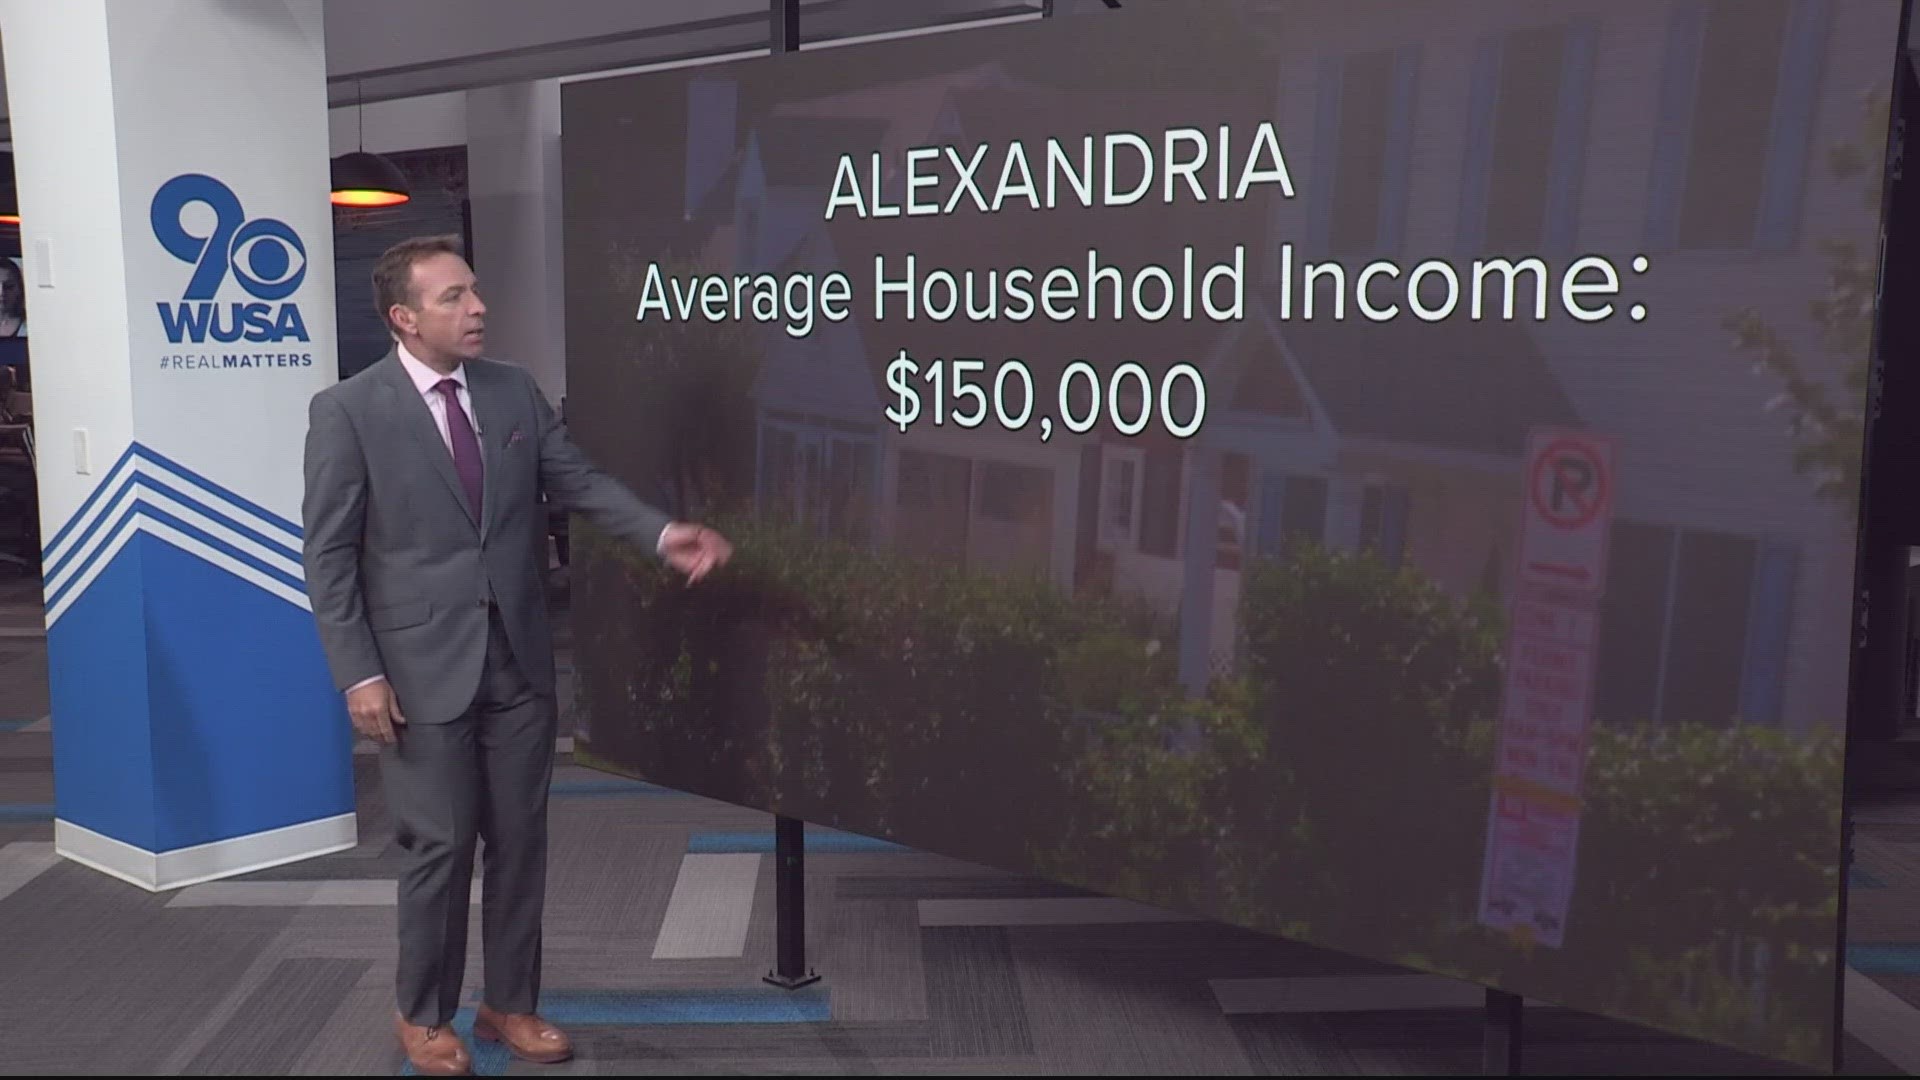 The average household income in Alexandria is $150,000 but the average price for a single-family home in the city is $940,000.